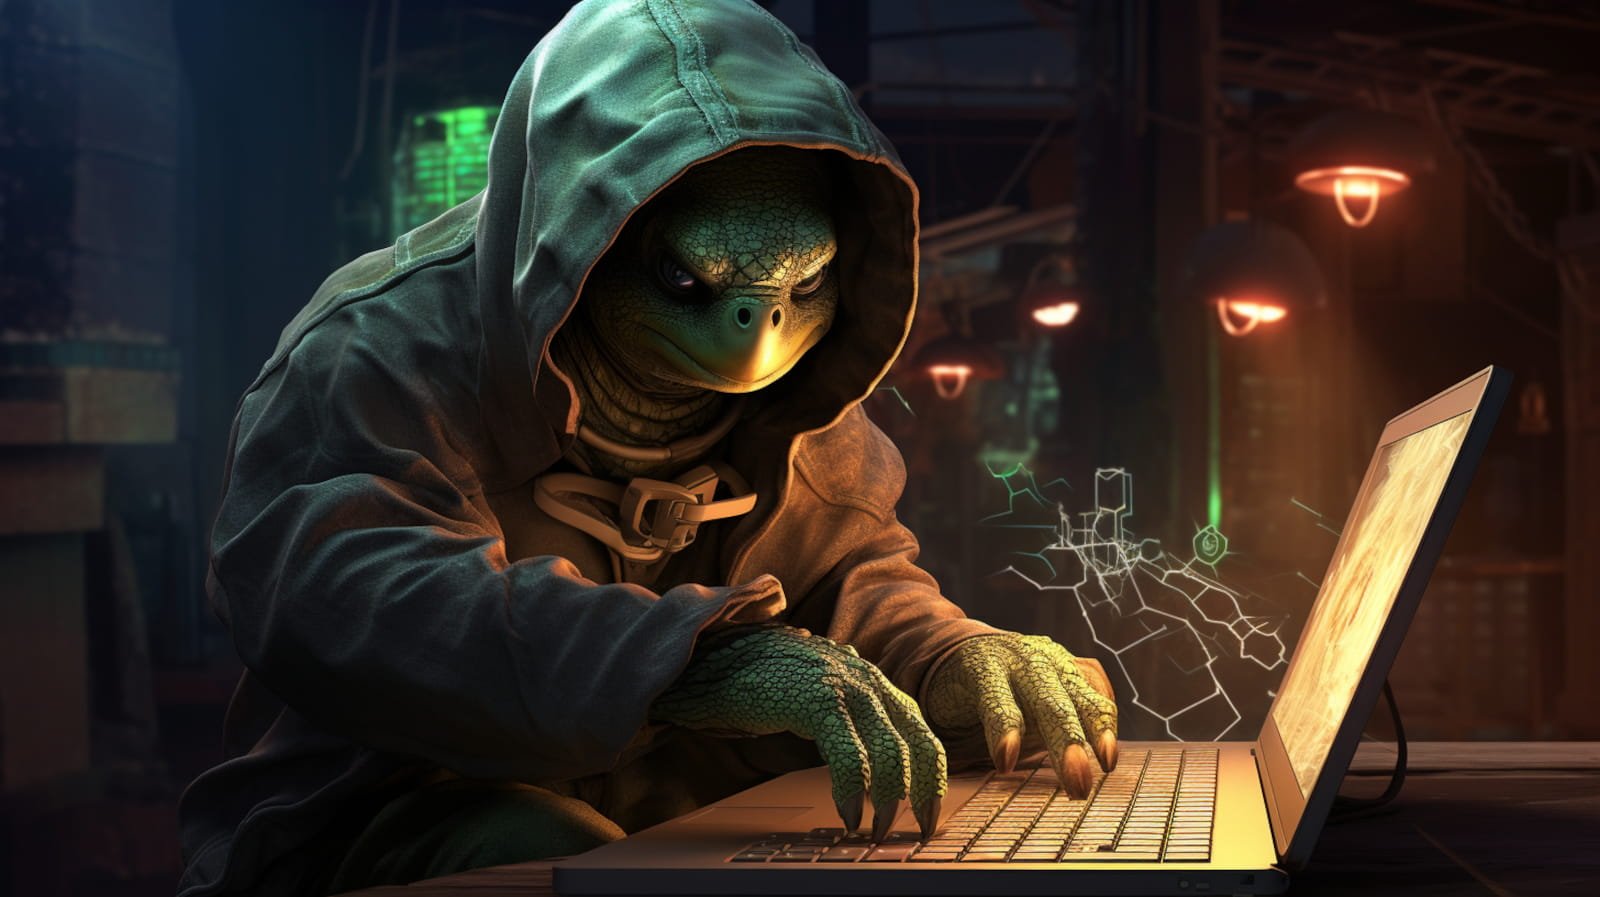 Terrapin attacks can downgrade security of OpenSSH connections